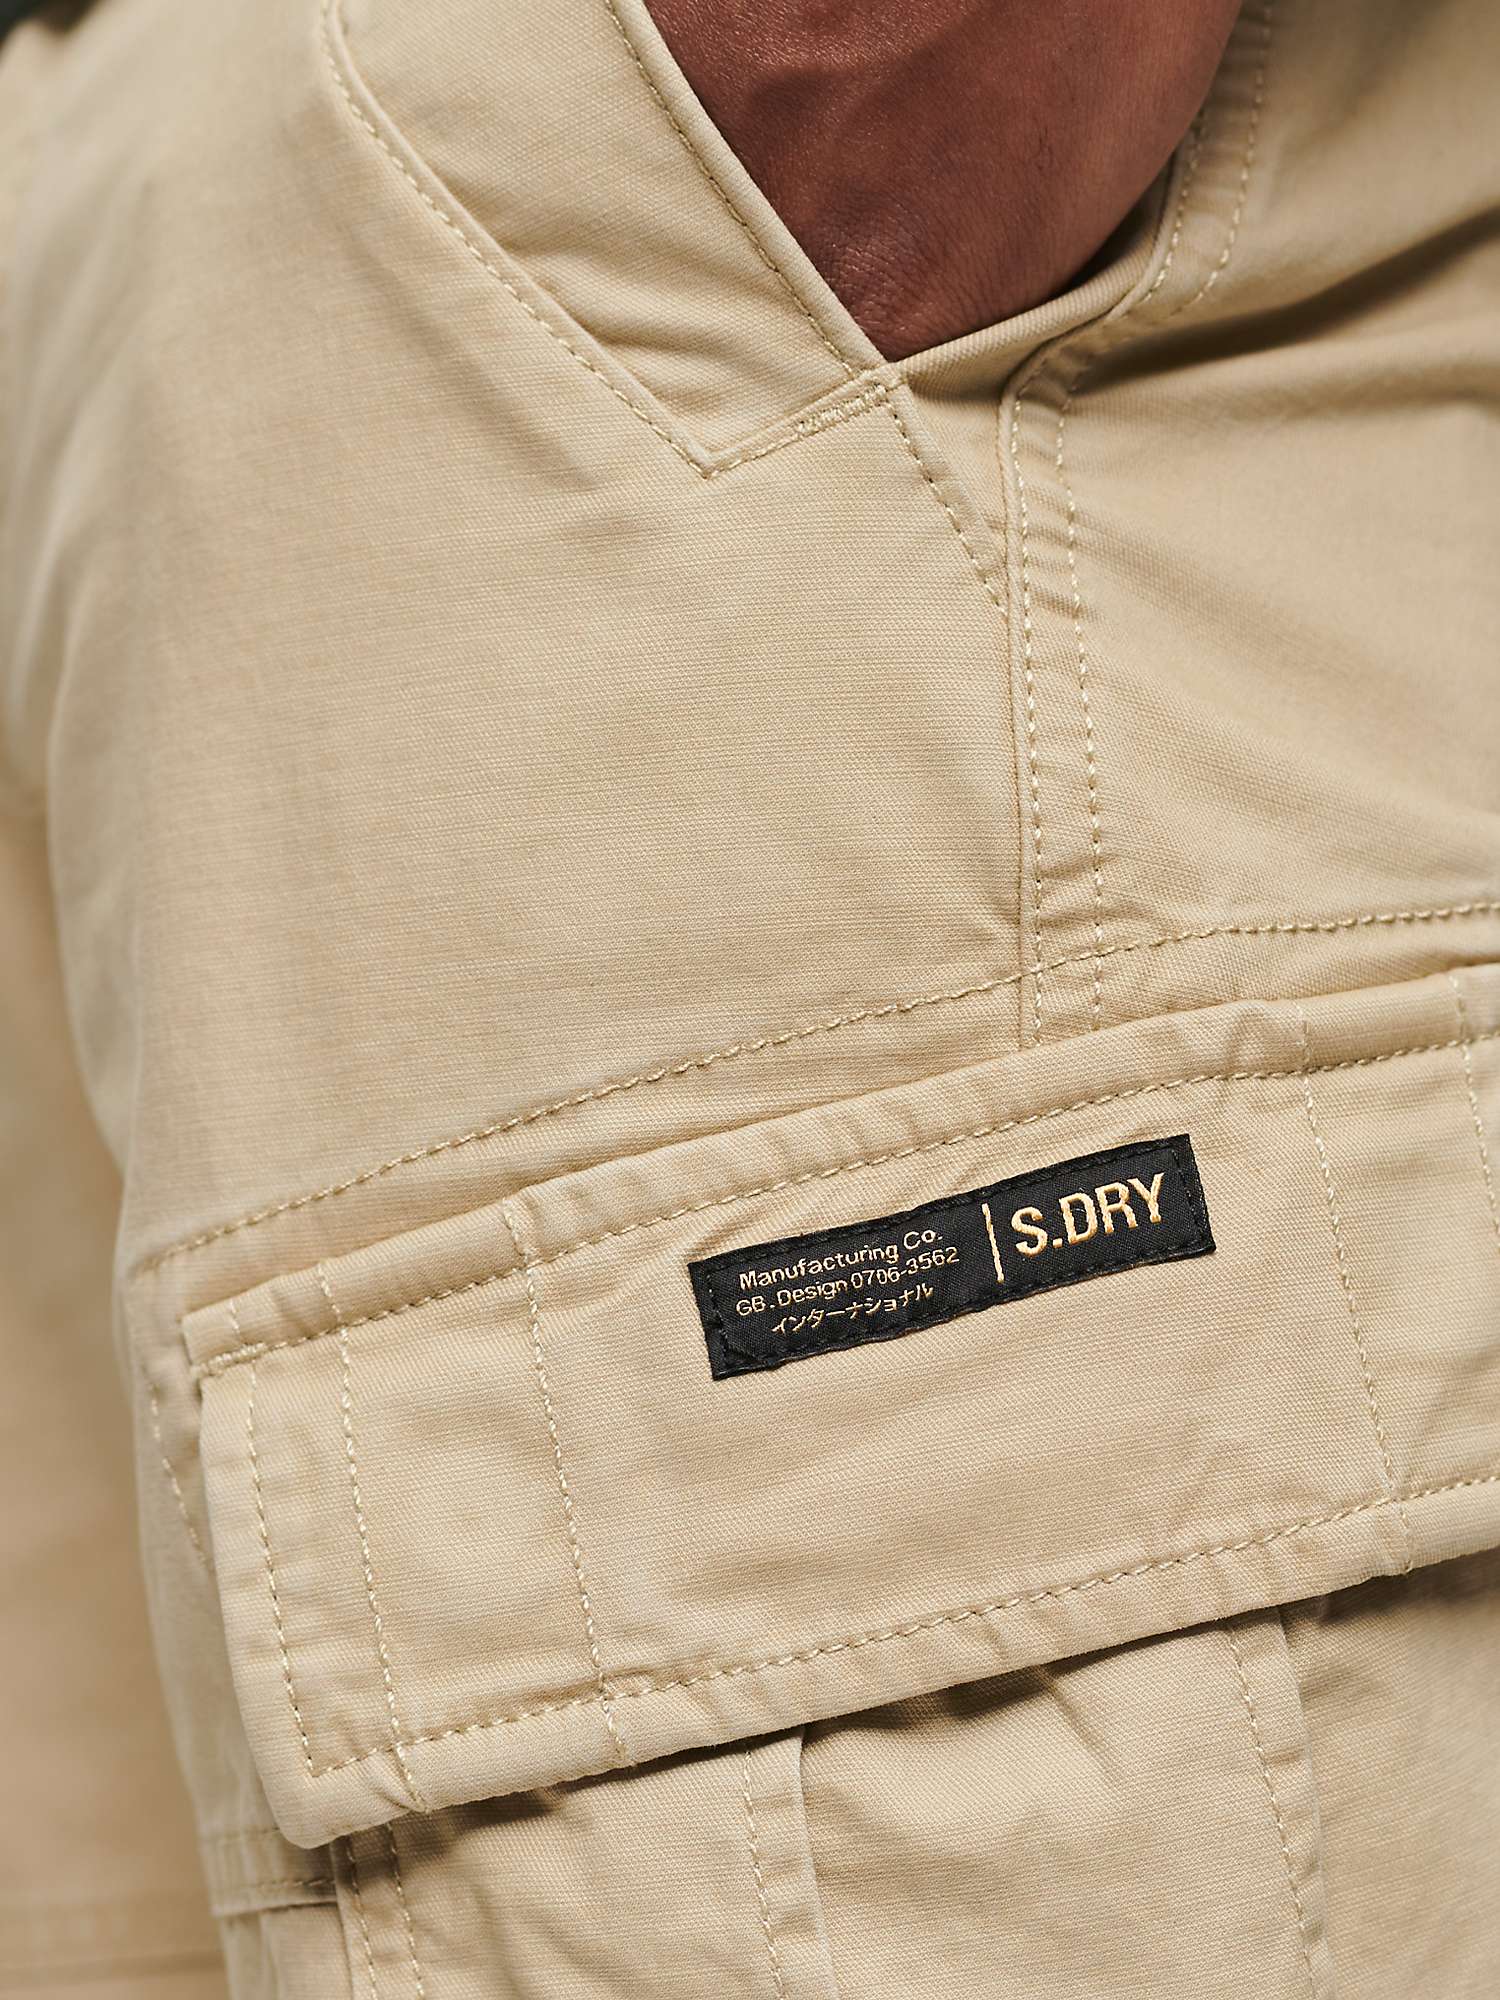 Buy Superdry Organic Cotton Core Cargo Shorts Online at johnlewis.com